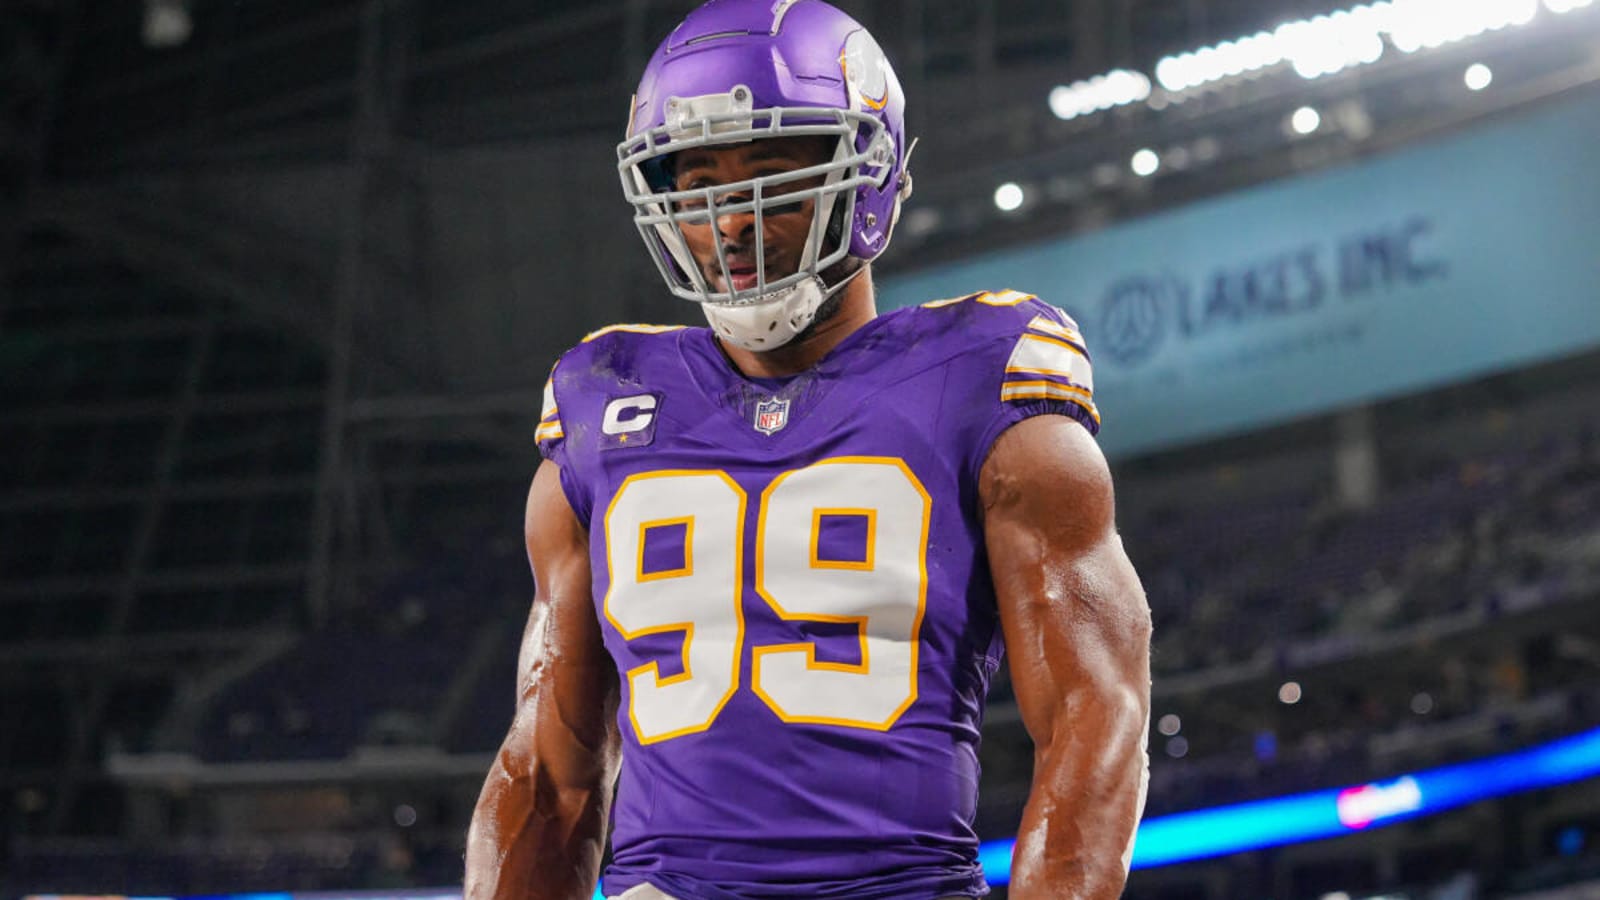 &#39;Once a Viking, always a Viking&#39;: Danielle Hunter begins next chapter